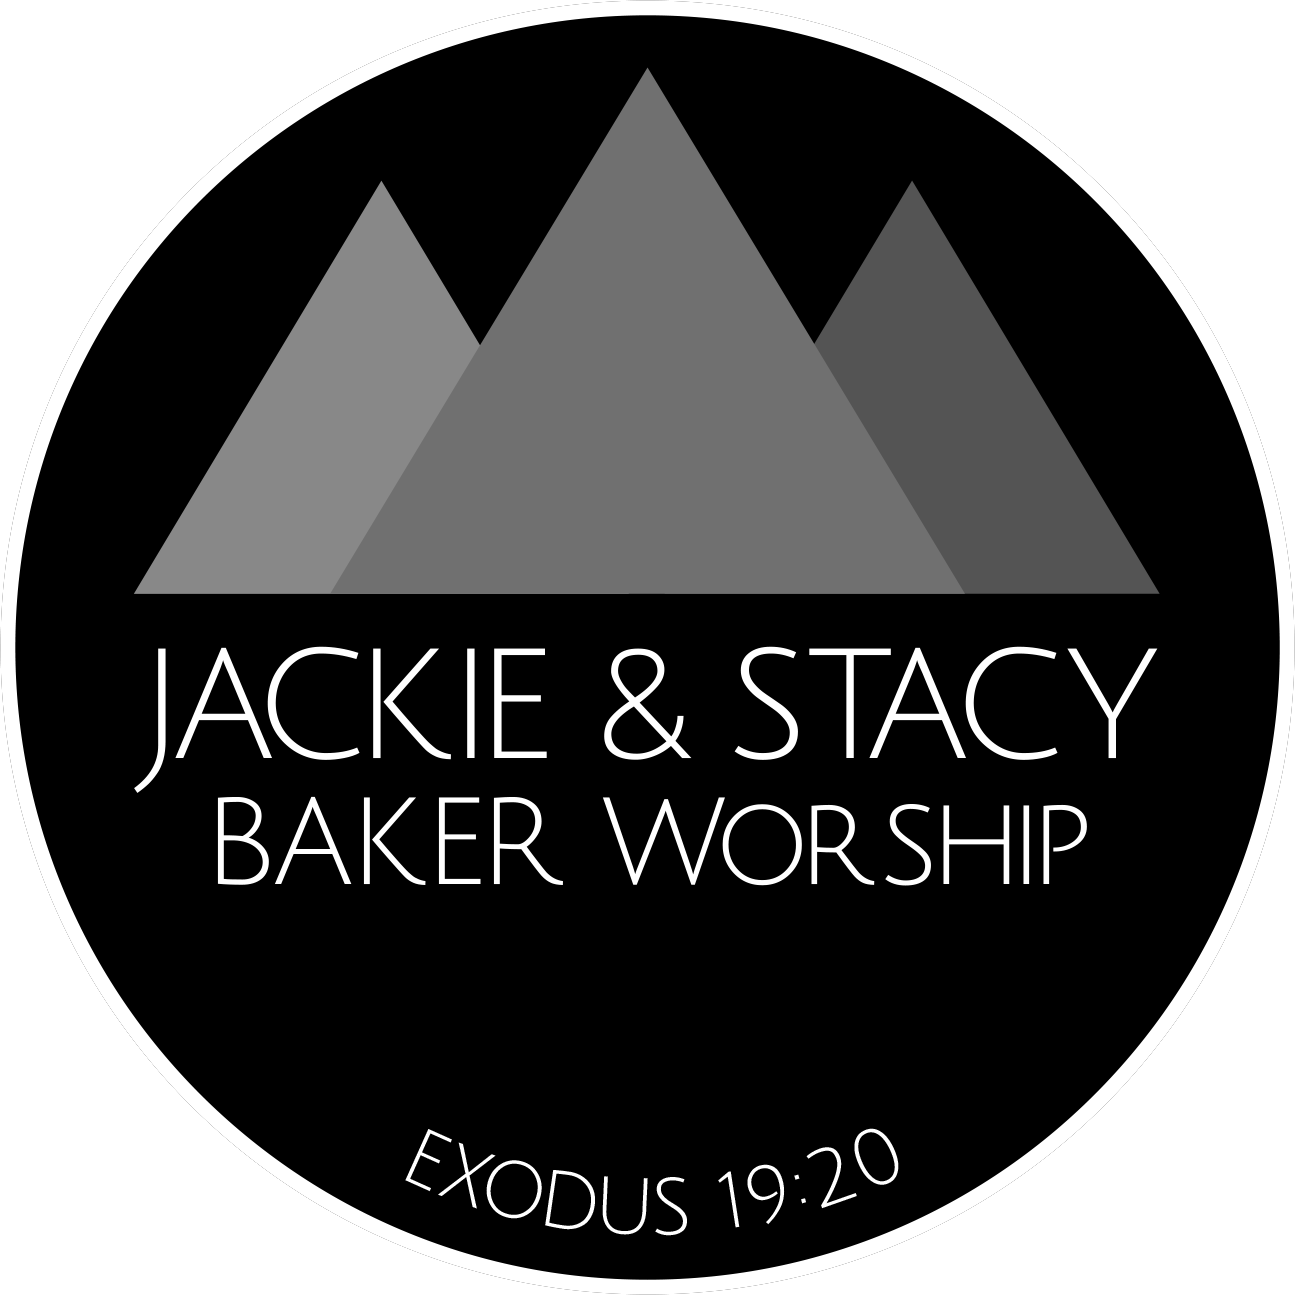 Jackie and Stacy Baker Worship logo